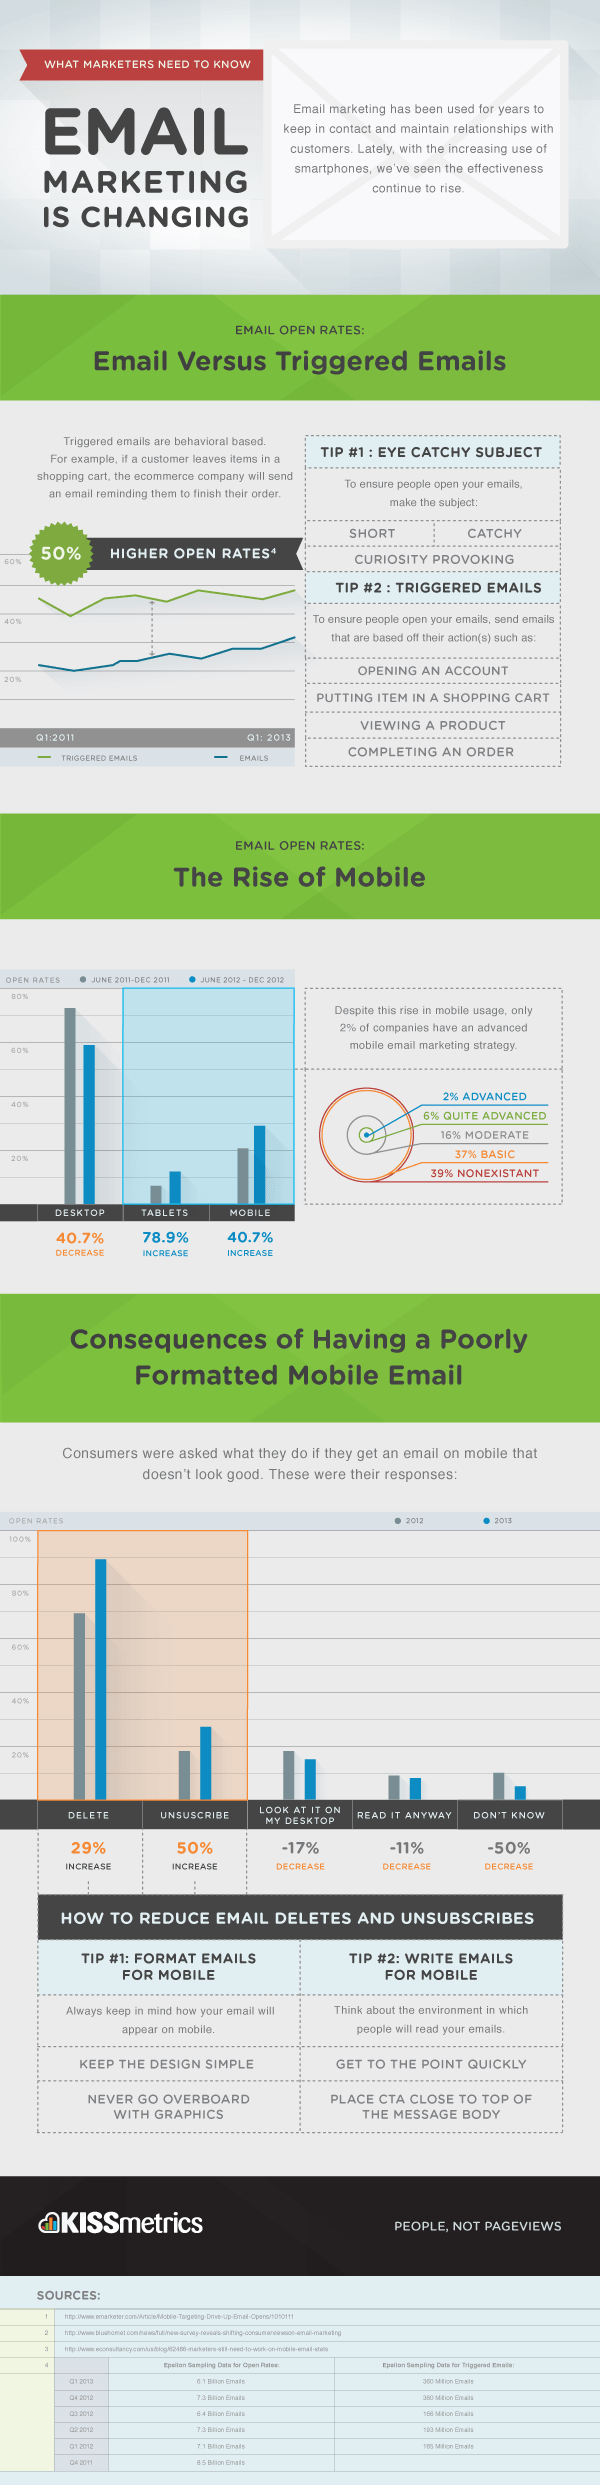 Email Marketing is Changing